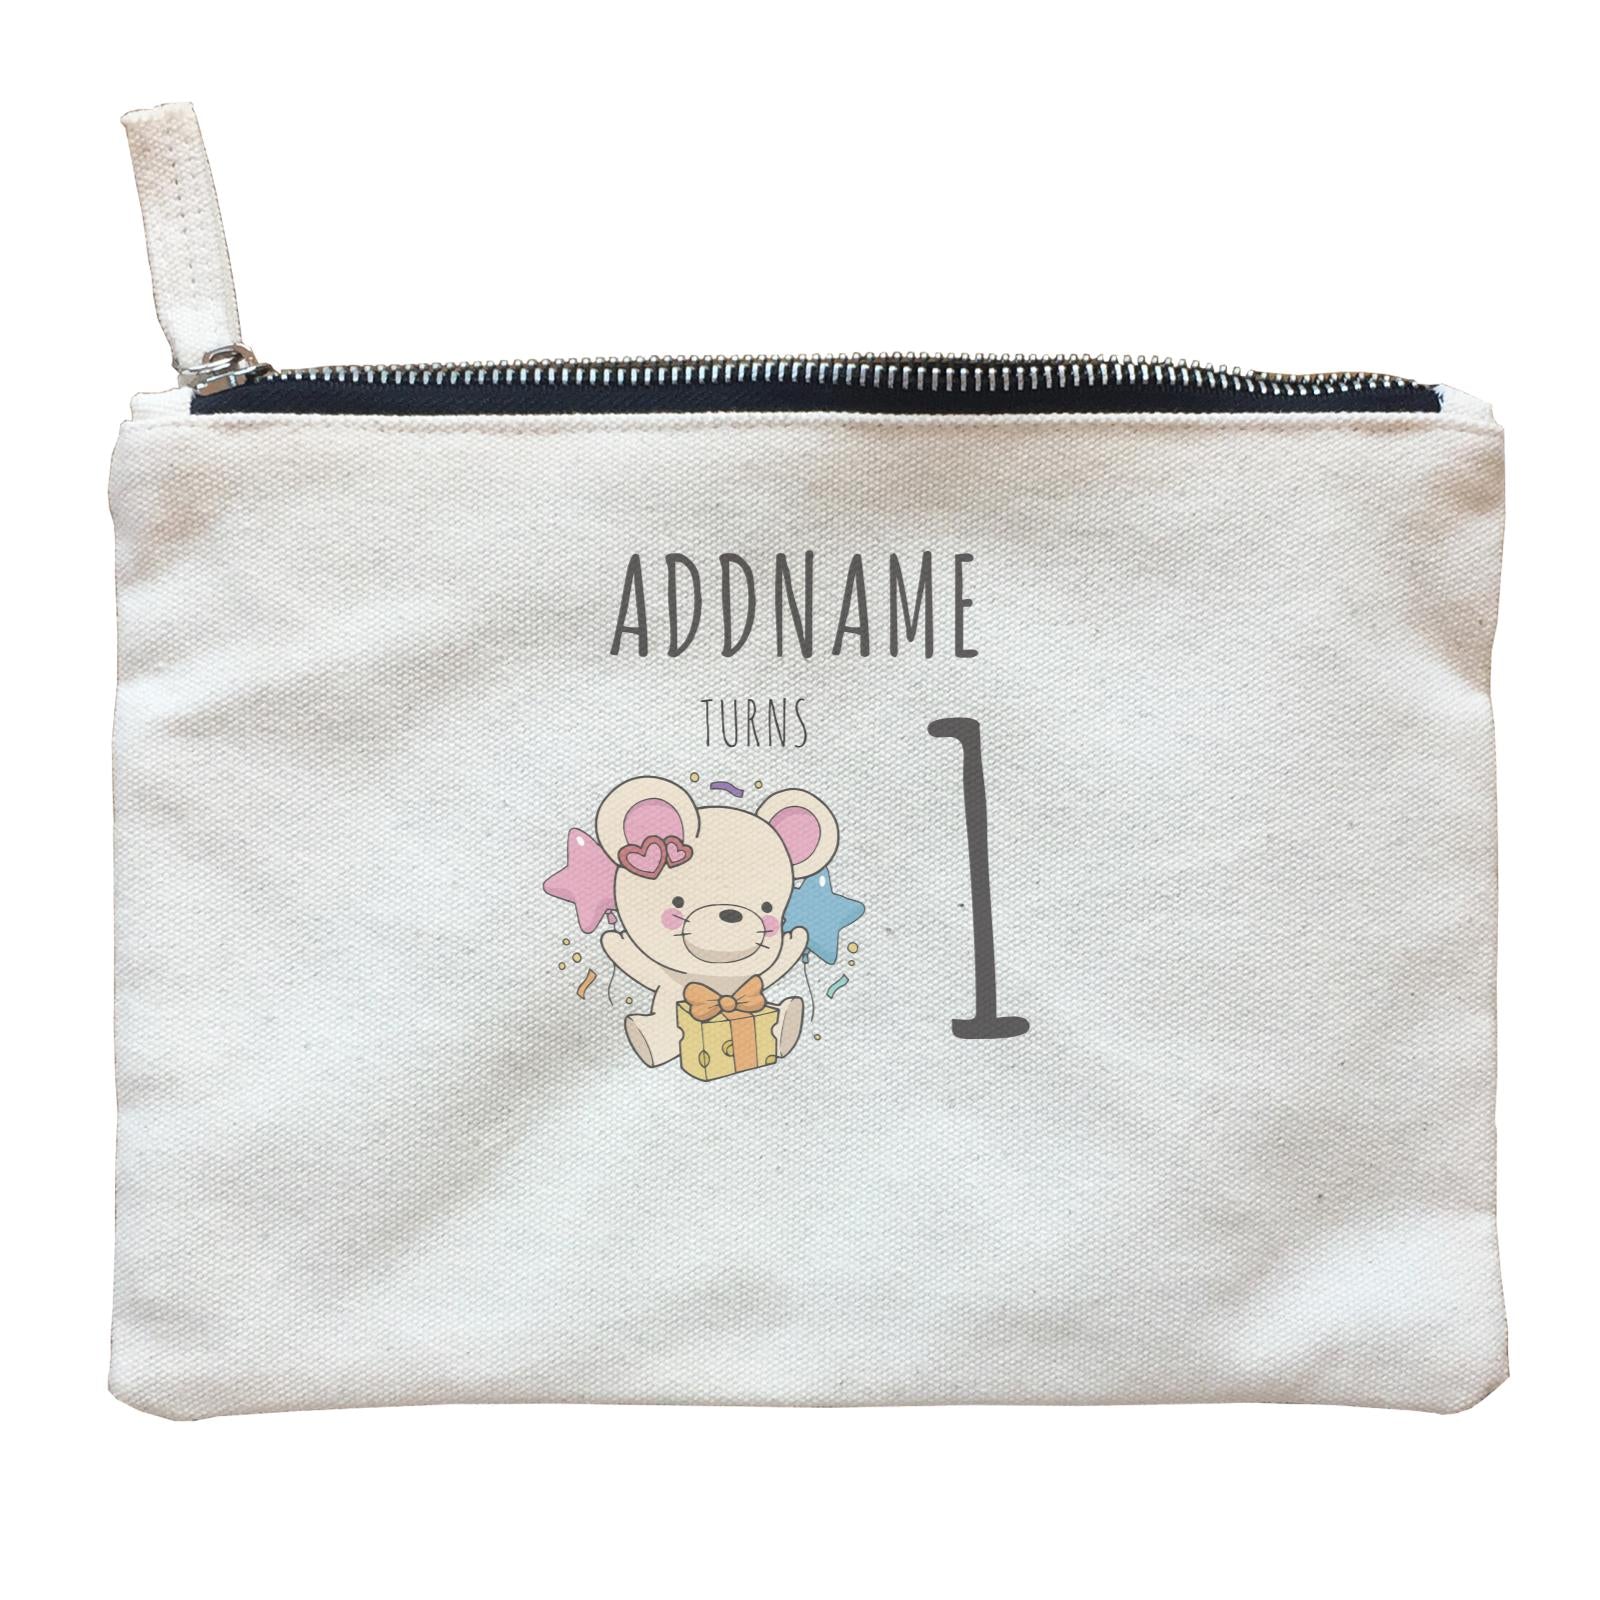 Birthday Sketch Animals Mouse with Cheese Present Addname Turns 1 Zipper Pouch